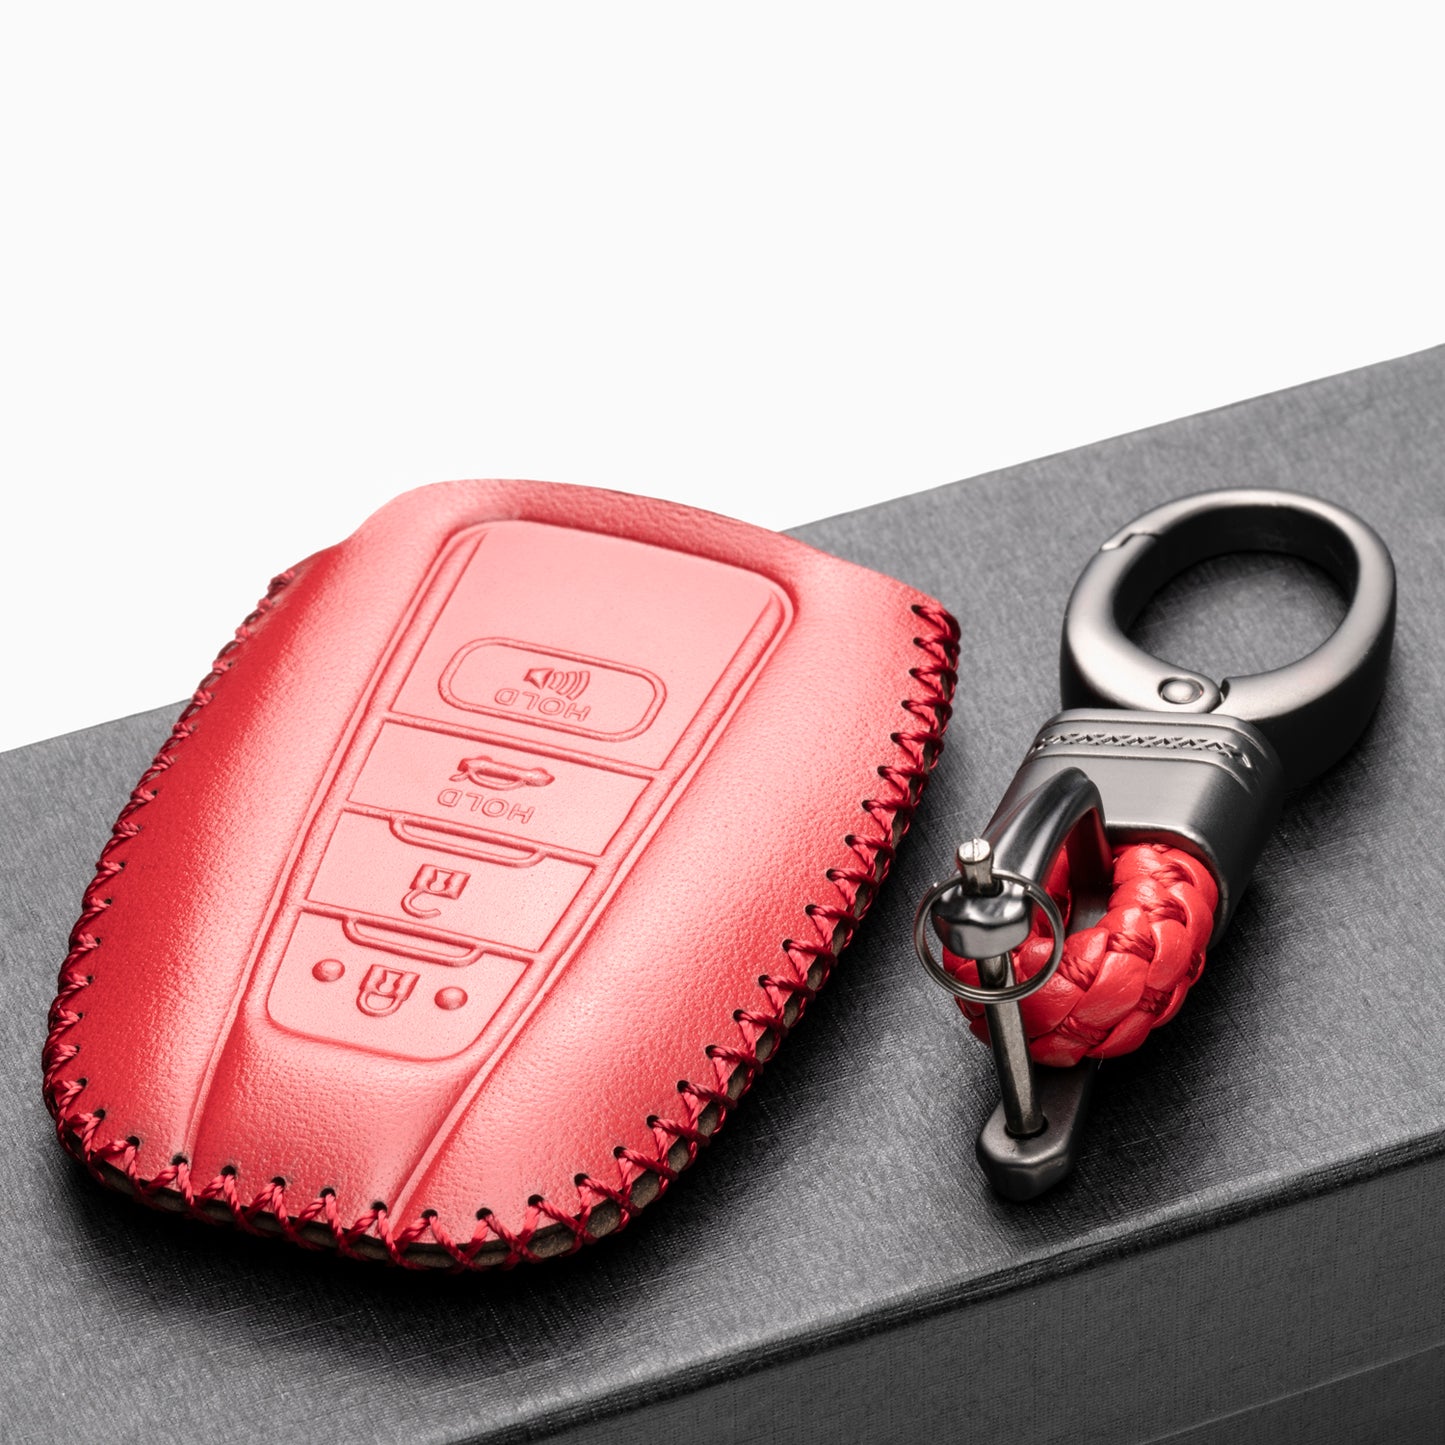 Vitodeco 4-Button Genuine Leather Smart Key Fob Case Compatible with Toyota Rav4 2021, Camry 2022, Prius 2021, Highlander 2022, CH-R 2021, Avalon 2021, Toyota 86 2020, Mirai 2022